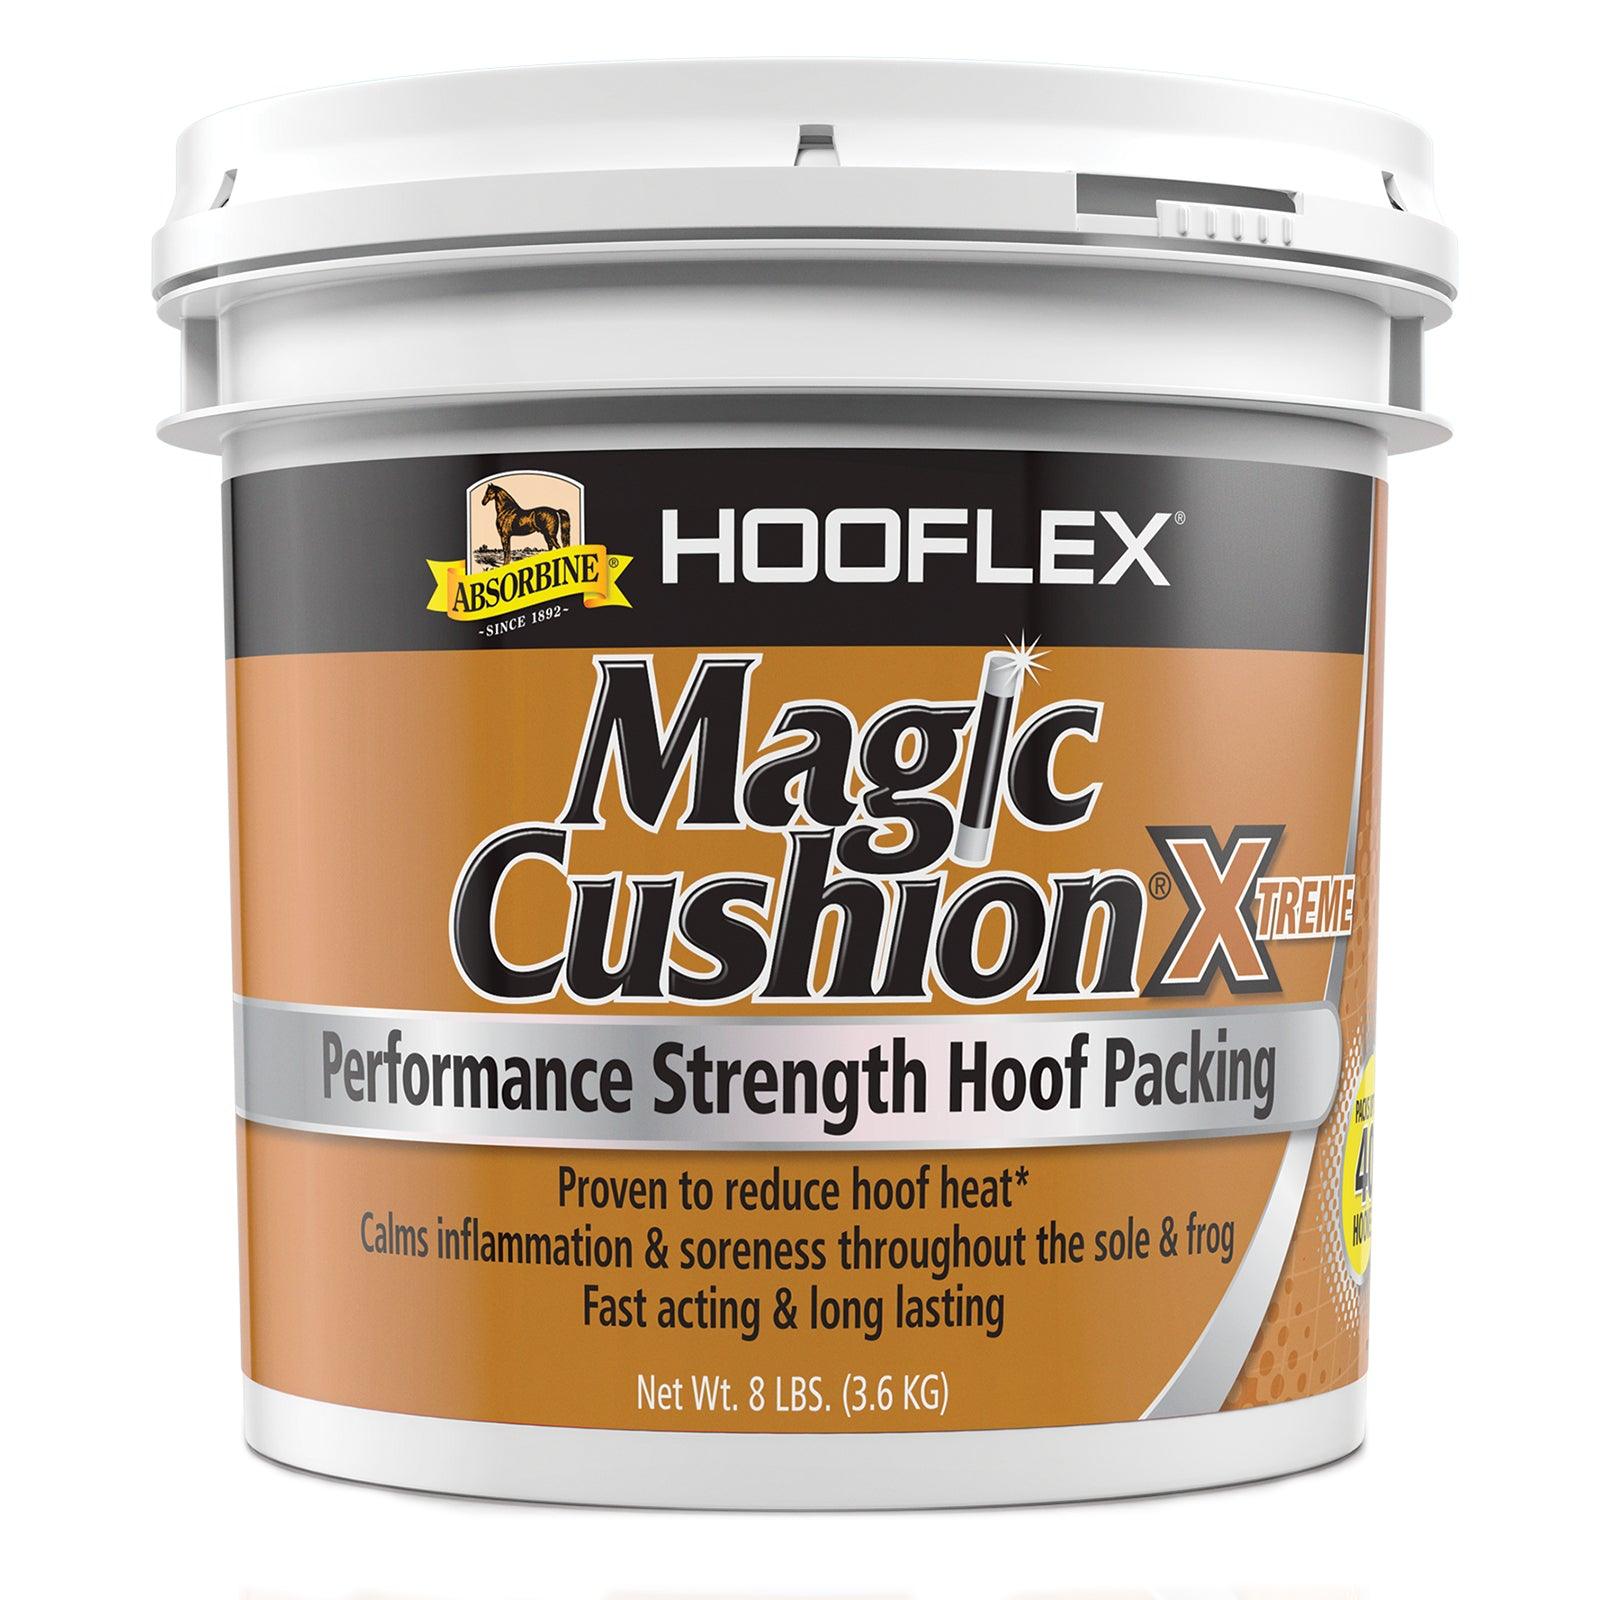 Magic Cushion Xtreme Performance Strength Hoof Packing. Proven to reduce hoof heat. Calms inflammation & soreness throughout the sole & frog. Fast acting, long lasting. Net weight 8 pound bucket.